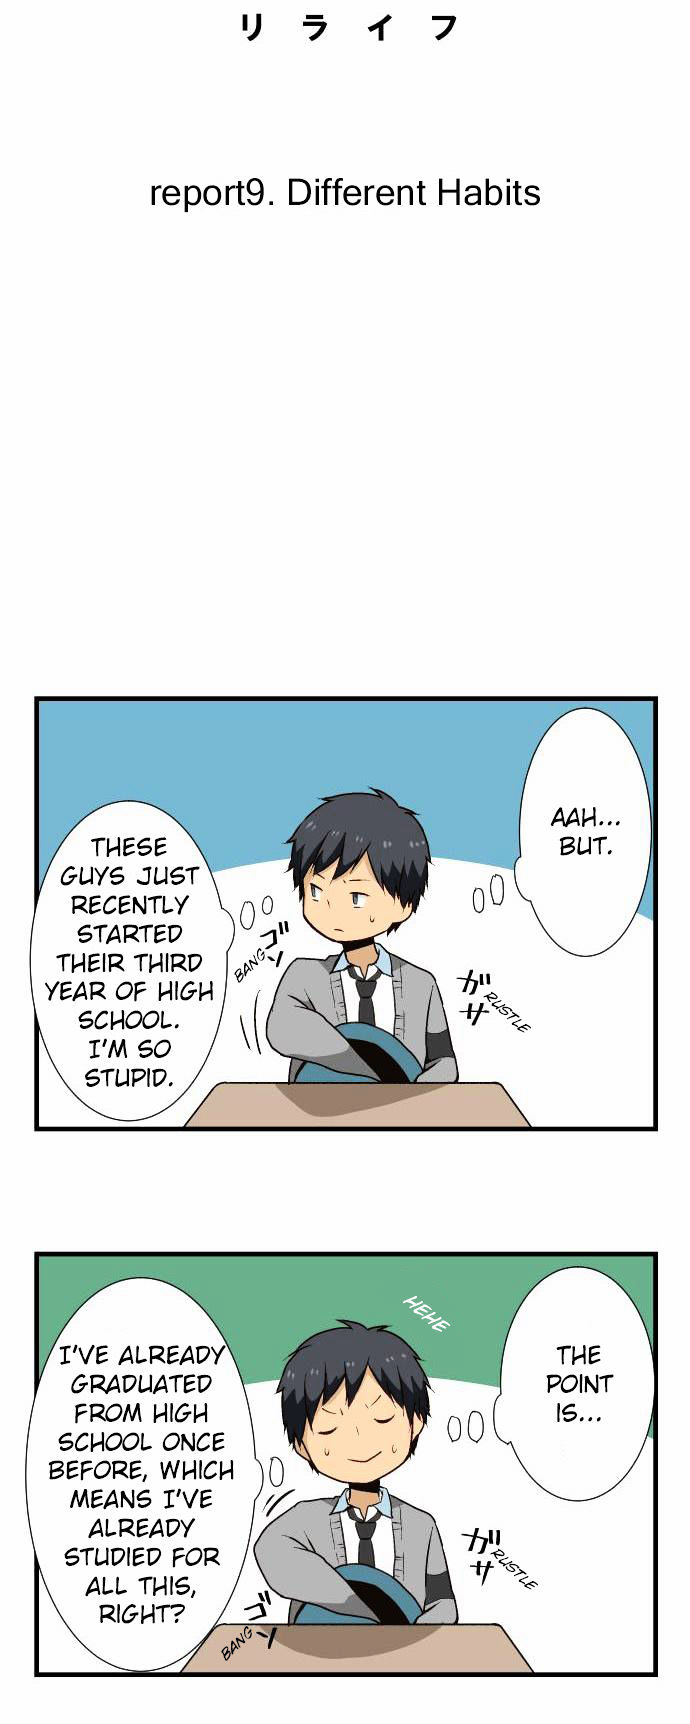 Relife - Page 2